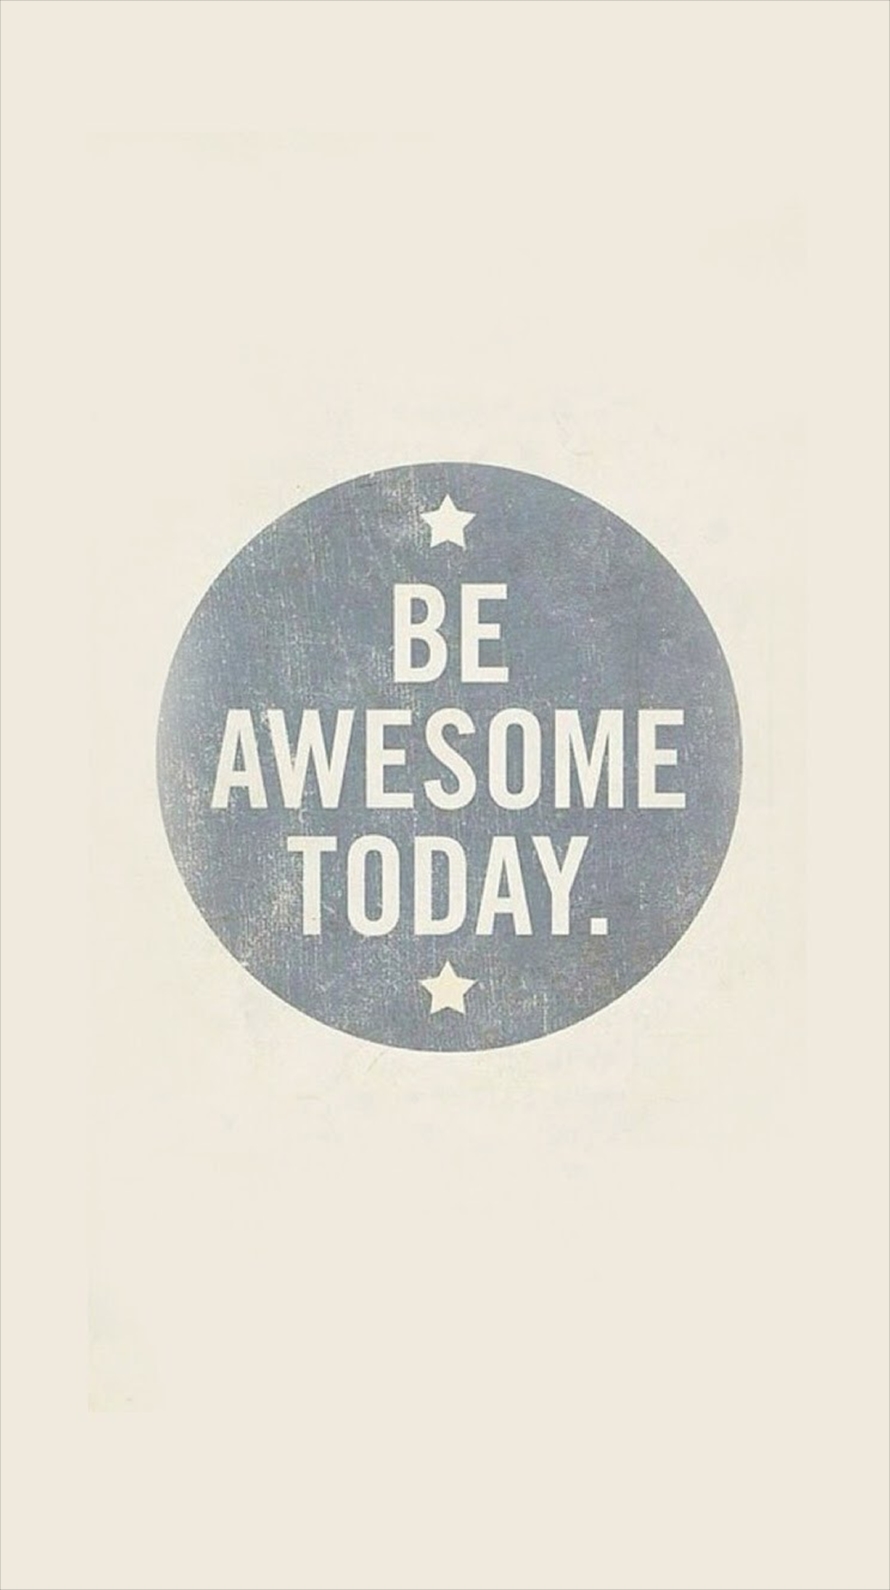 BE AWESOME TODAY iPhone6壁紙